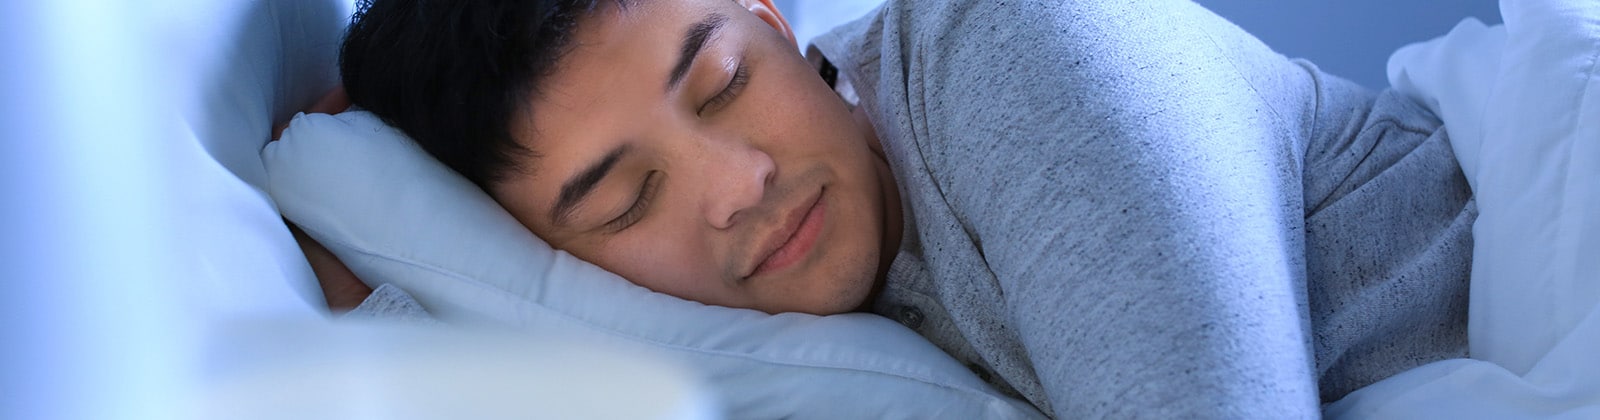 Asian man sleeping on side with eyes closed and slight smile